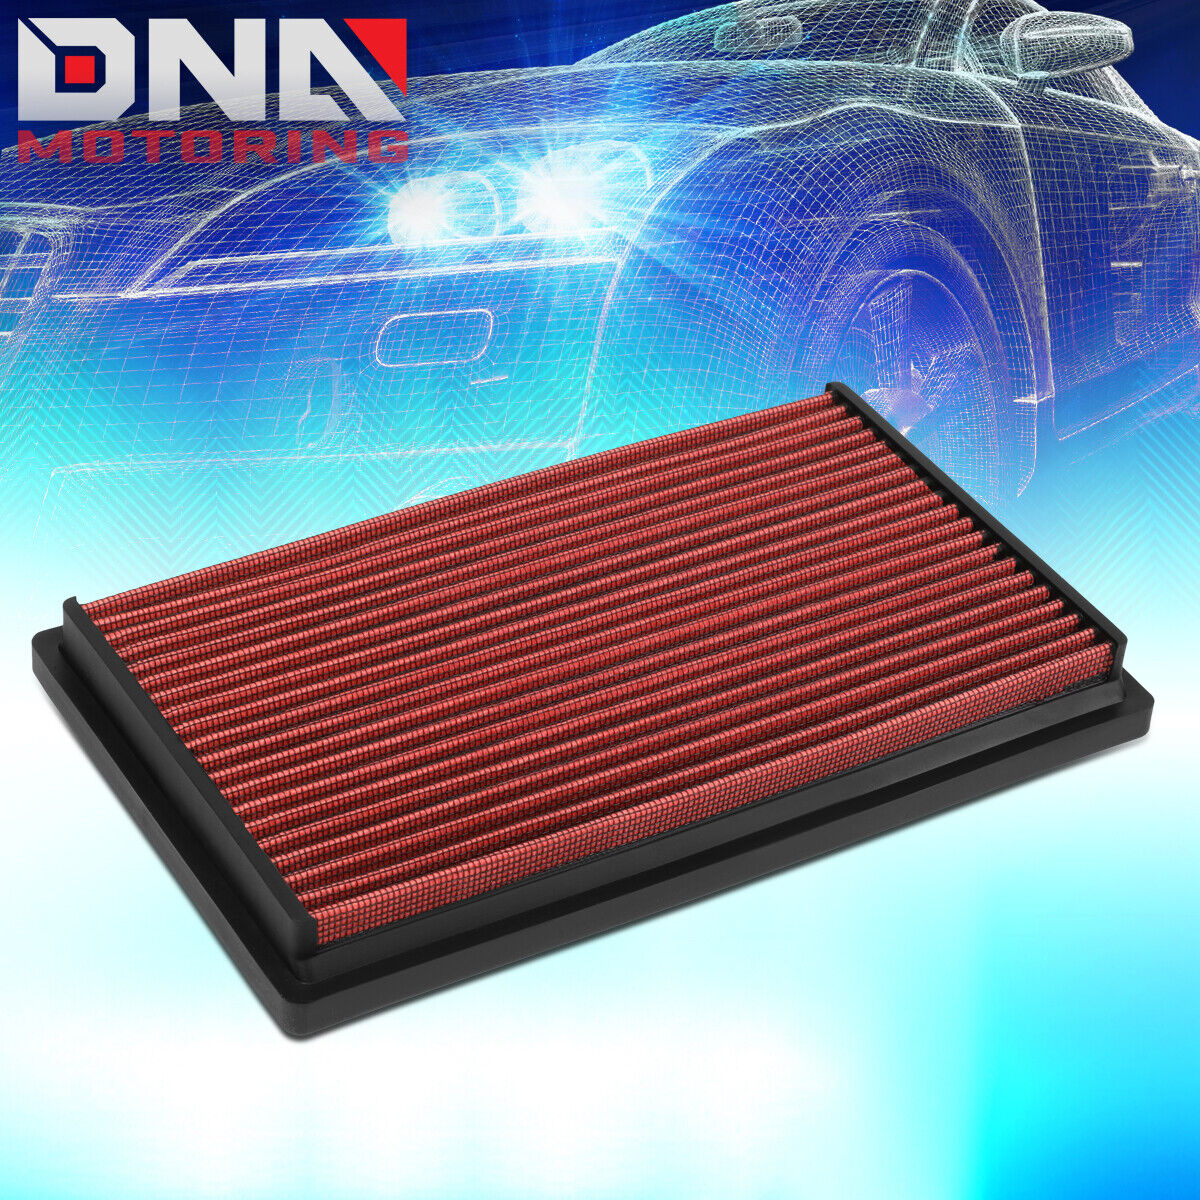 FOR 1990-1997 FORD ESCORT MAZDA MX-5 MIATA TRACER RED HIGH FLOW AIR FILTER PANEL